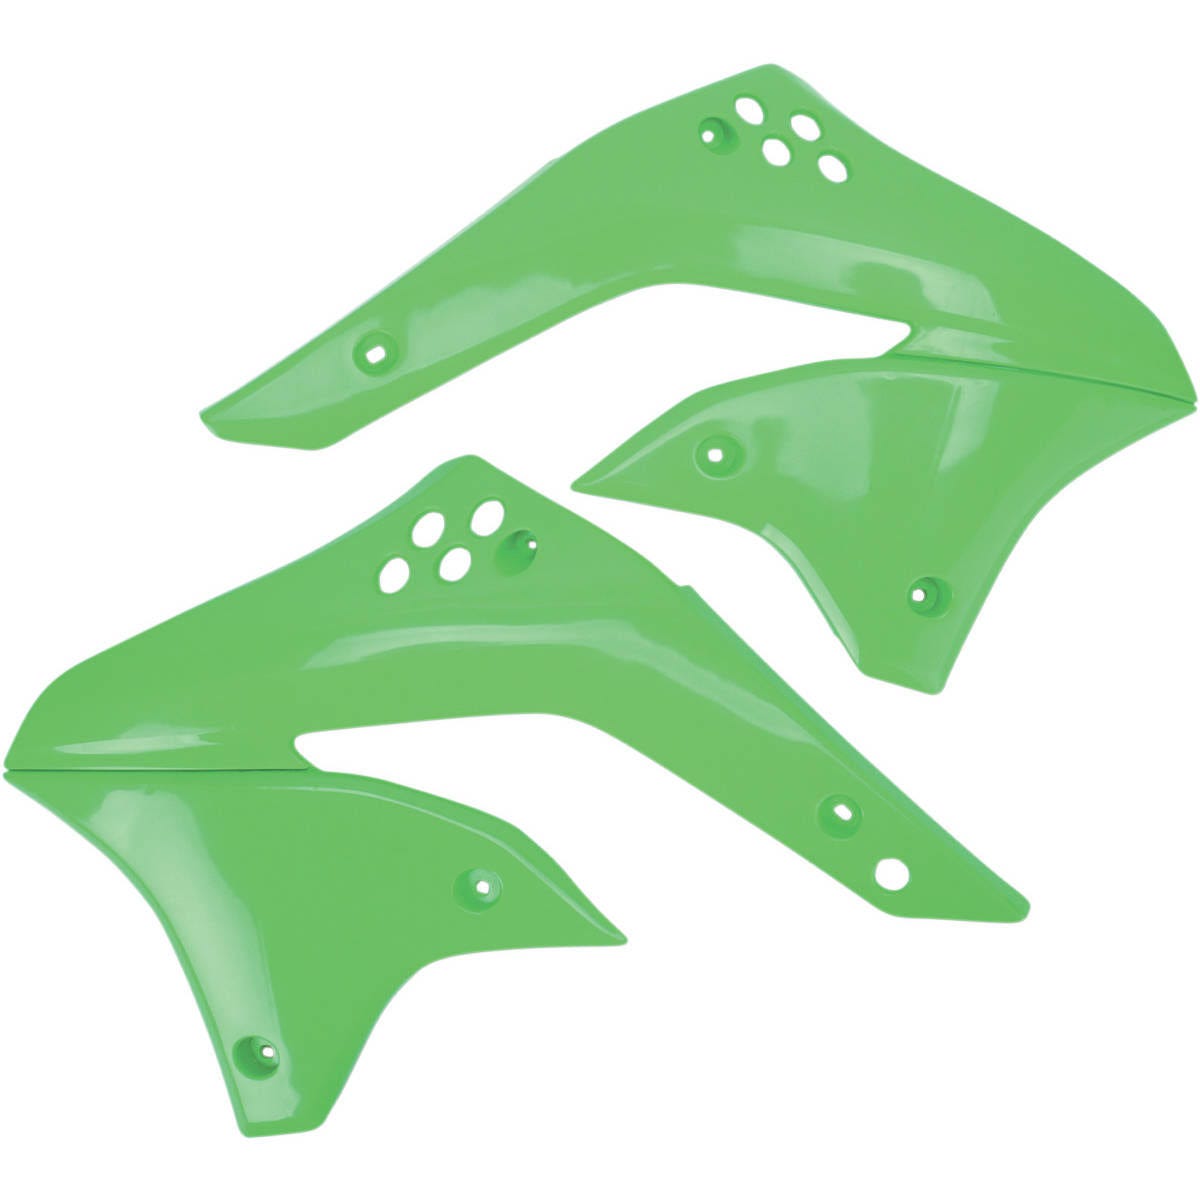 Ufo Radiator Covers - Green - KA03788-026 (Choose Color & Made in Italy) | Image